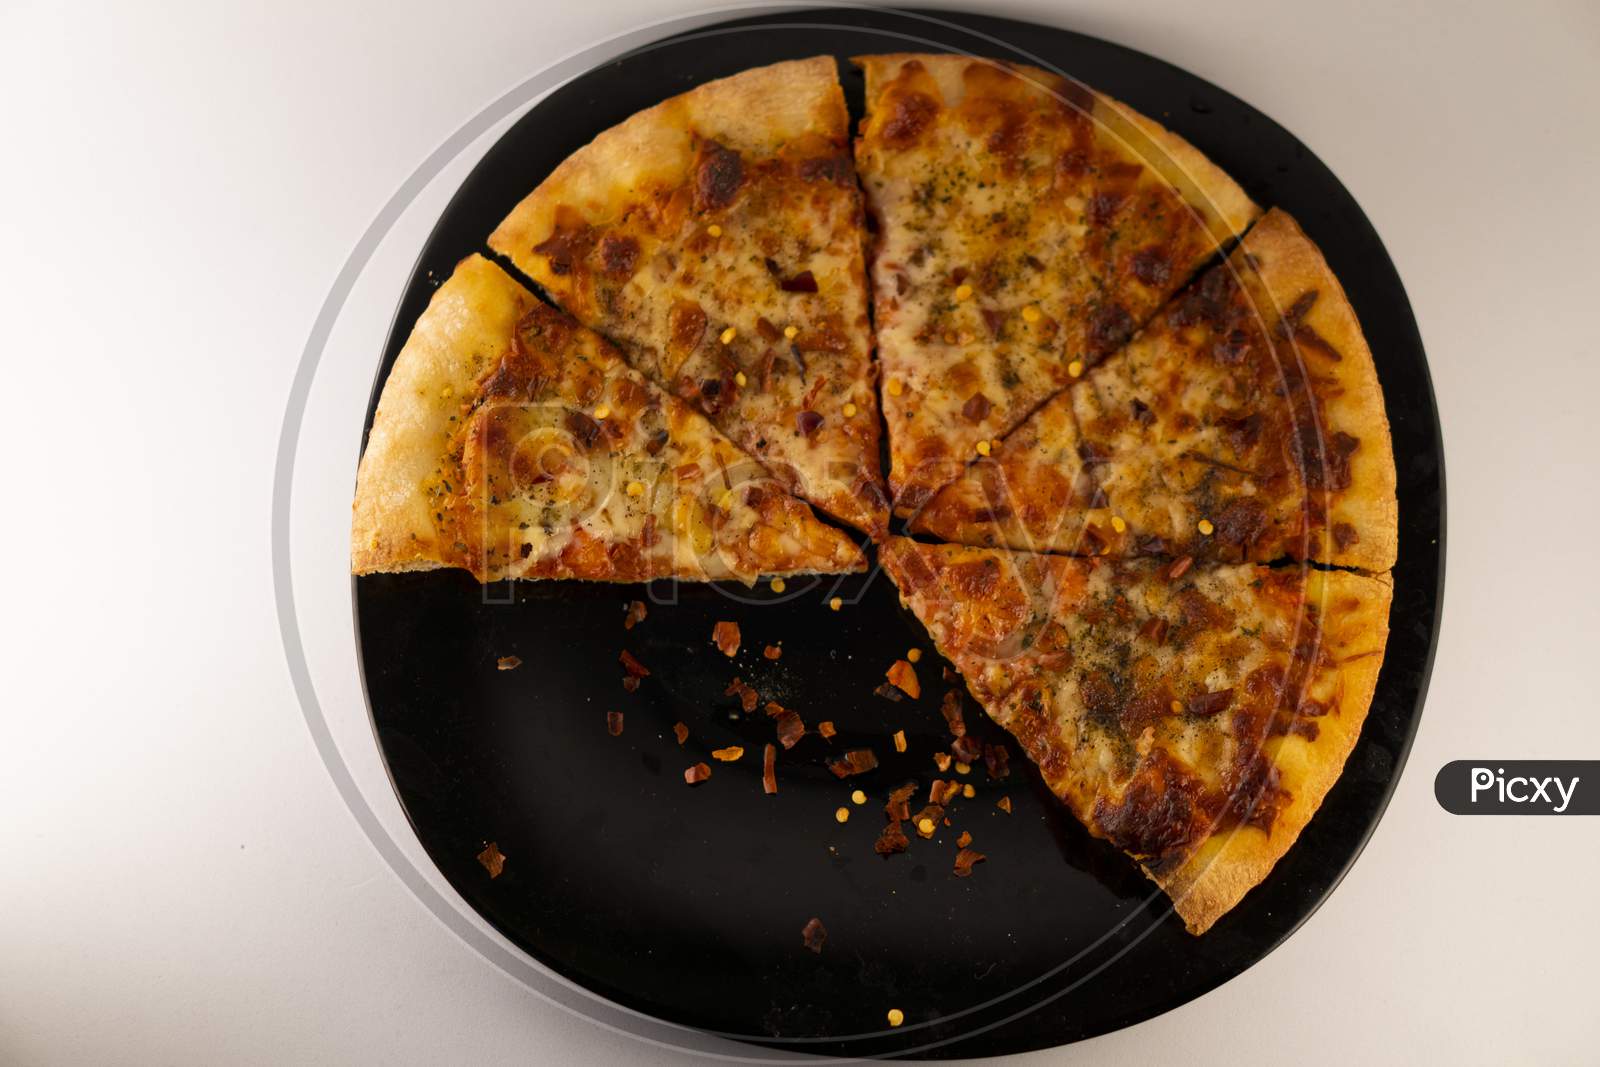 Pizza on a black plate against a white  background .